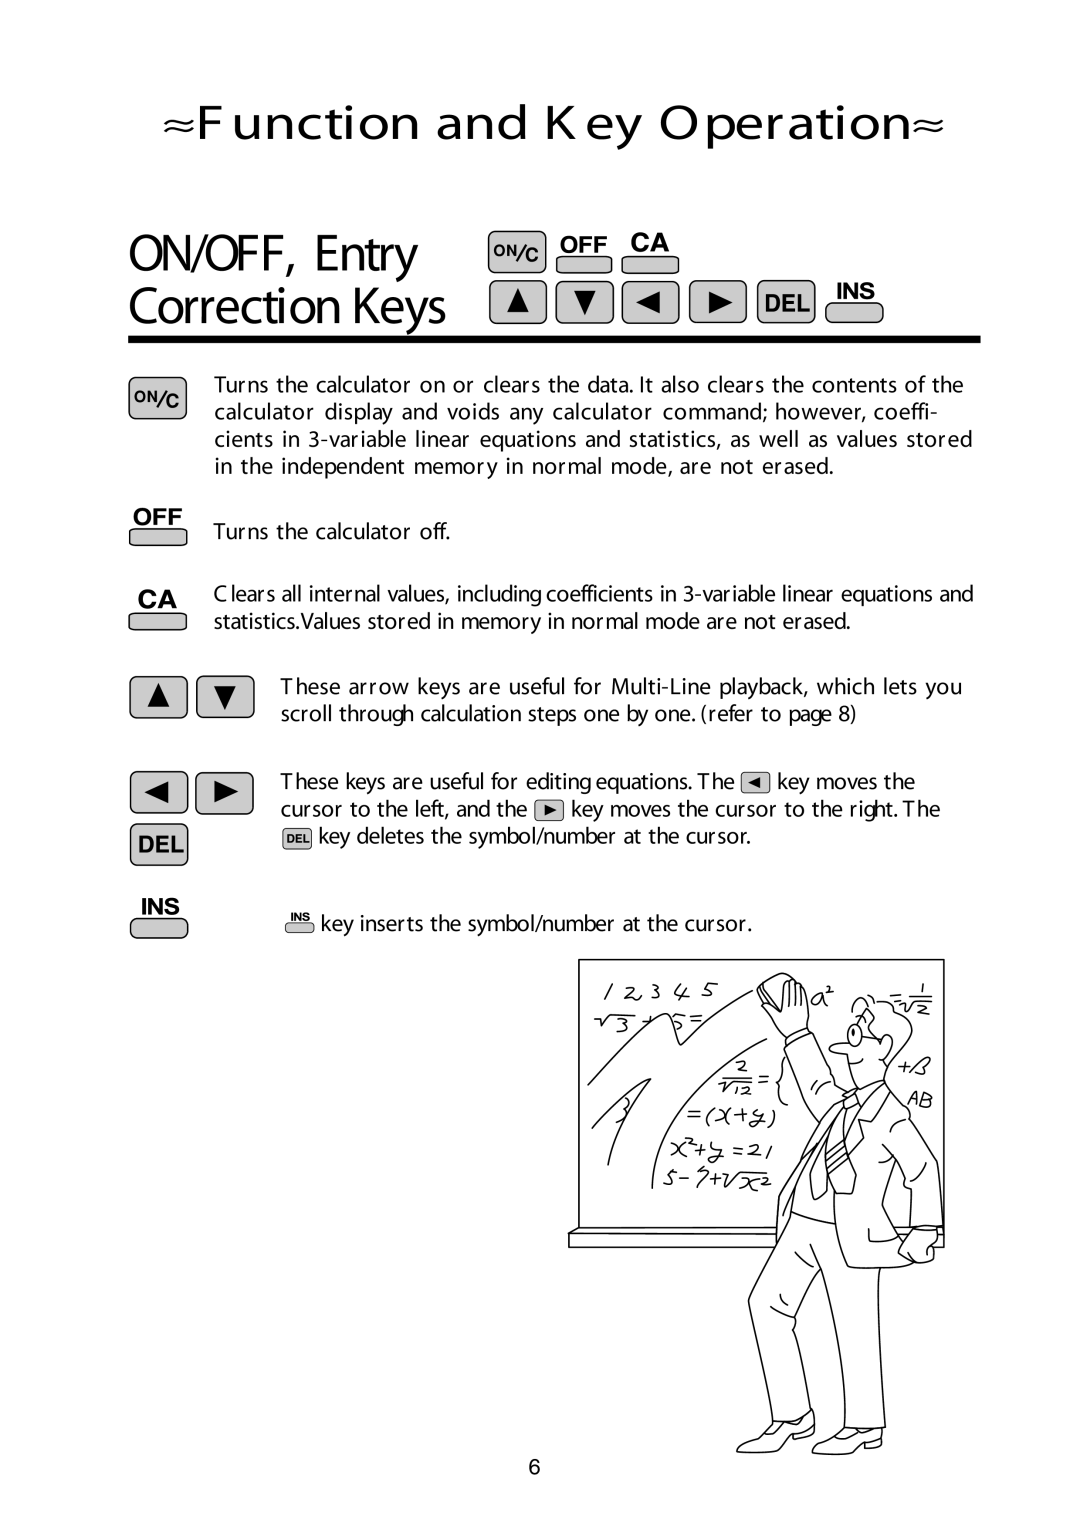 Sharp W Series manual ON/OFF, Entry Correction Keys, ≈F unction and K ey Operation≈ 